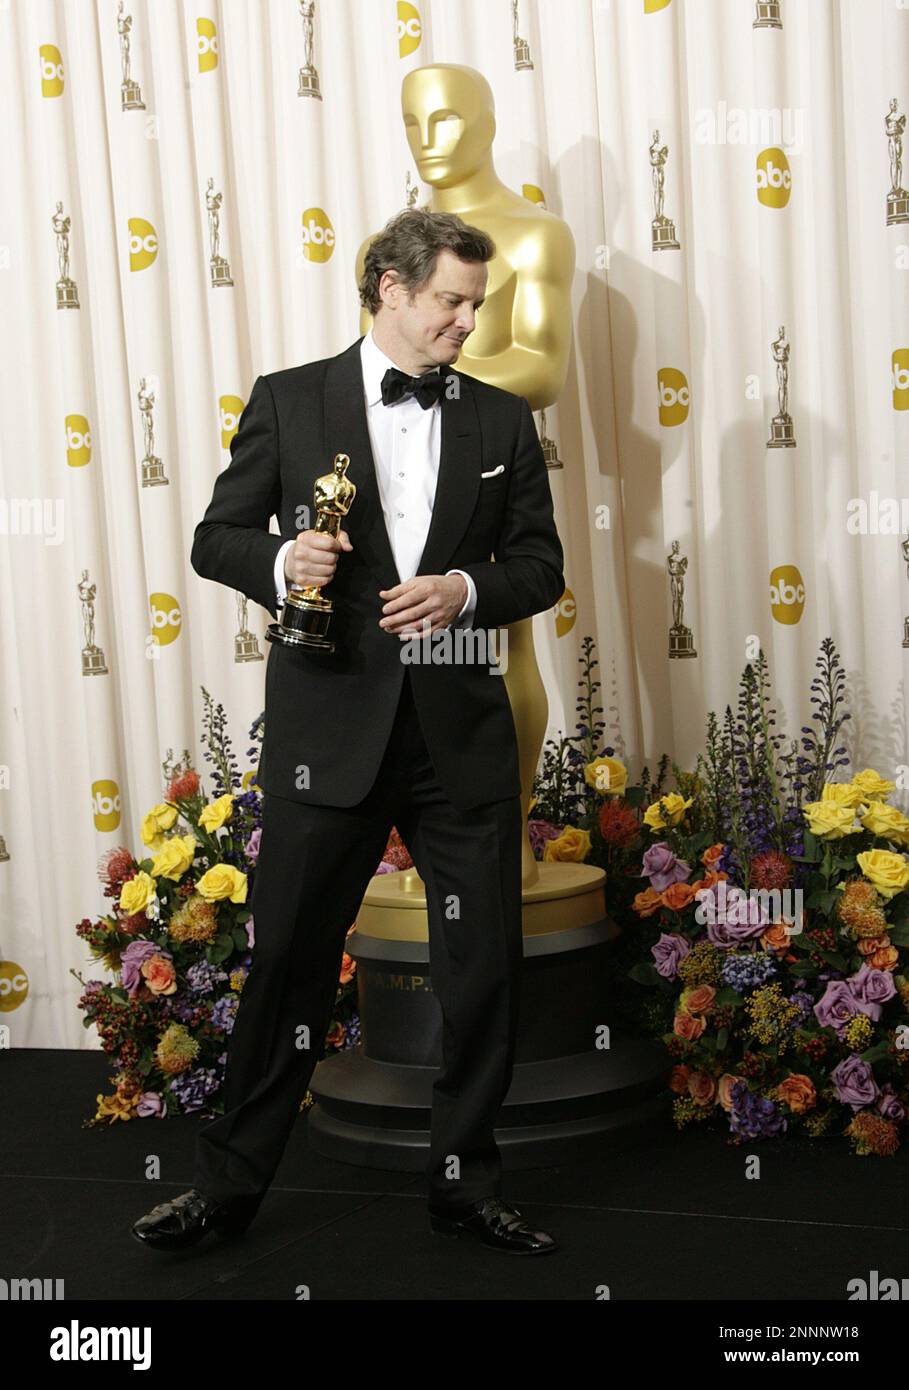 Actor Colin Firth holds the award for Best Actor in a Motion Picture for his role in 'The King's Speech' poses in the press room at the 83rd Annual Academy Awards held at the Kodak Theatre on February 27, 2011 in Hollywood, California. Photo by Francis Specker Stock Photo